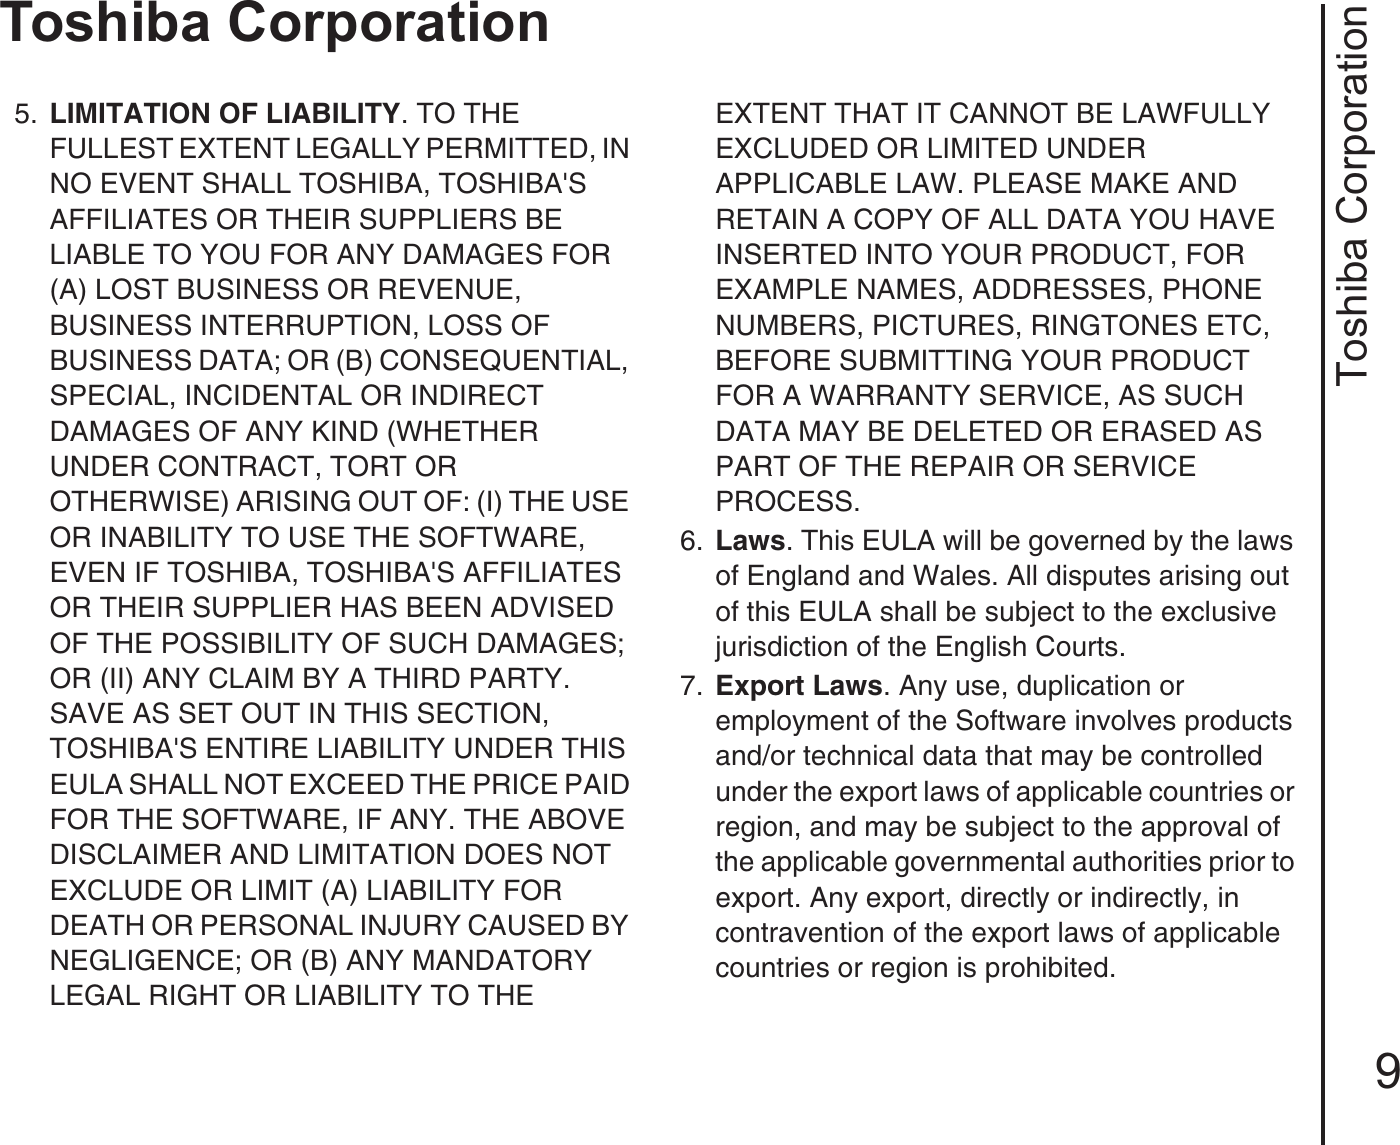 Toshiba Corporation9Toshiba Corporation5.  LIMITATION OF LIABILITY. TO THE FULLEST EXTENT LEGALLY PERMITTED, IN NO EVENT SHALL TOSHIBA, TOSHIBA&apos;S AFFILIATES OR THEIR SUPPLIERS BE LIABLE TO YOU FOR ANY DAMAGES FOR (A) LOST BUSINESS OR REVENUE, BUSINESS INTERRUPTION, LOSS OF BUSINESS DATA; OR (B) CONSEQUENTIAL, SPECIAL, INCIDENTAL OR INDIRECT DAMAGES OF ANY KIND (WHETHER UNDER CONTRACT, TORT OR OTHERWISE) ARISING OUT OF: (I) THE USE OR INABILITY TO USE THE SOFTWARE, EVEN IF TOSHIBA, TOSHIBA&apos;S AFFILIATES OR THEIR SUPPLIER HAS BEEN ADVISED OF THE POSSIBILITY OF SUCH DAMAGES; OR (II) ANY CLAIM BY A THIRD PARTY. SAVE AS SET OUT IN THIS SECTION, TOSHIBA&apos;S ENTIRE LIABILITY UNDER THIS EULA SHALL NOT EXCEED THE PRICE PAID FOR THE SOFTWARE, IF ANY. THE ABOVE DISCLAIMER AND LIMITATION DOES NOT EXCLUDE OR LIMIT (A) LIABILITY FOR DEATH OR PERSONAL INJURY CAUSED BY NEGLIGENCE; OR (B) ANY MANDATORY LEGAL RIGHT OR LIABILITY TO THE EXTENT THAT IT CANNOT BE LAWFULLY EXCLUDED OR LIMITED UNDER APPLICABLE LAW. PLEASE MAKE AND RETAIN A COPY OF ALL DATA YOU HAVE INSERTED INTO YOUR PRODUCT, FOR EXAMPLE NAMES, ADDRESSES, PHONE NUMBERS, PICTURES, RINGTONES ETC, BEFORE SUBMITTING YOUR PRODUCT FOR A WARRANTY SERVICE, AS SUCH DATA MAY BE DELETED OR ERASED AS PART OF THE REPAIR OR SERVICE PROCESS.6.  Laws. This EULA will be governed by the laws of England and Wales. All disputes arising out of this EULA shall be subject to the exclusive jurisdiction of the English Courts.7.  Export Laws. Any use, duplication or employment of the Software involves products and/or technical data that may be controlled under the export laws of applicable countries or region, and may be subject to the approval of the applicable governmental authorities prior to export. Any export, directly or indirectly, in contravention of the export laws of applicable countries or region is prohibited. 